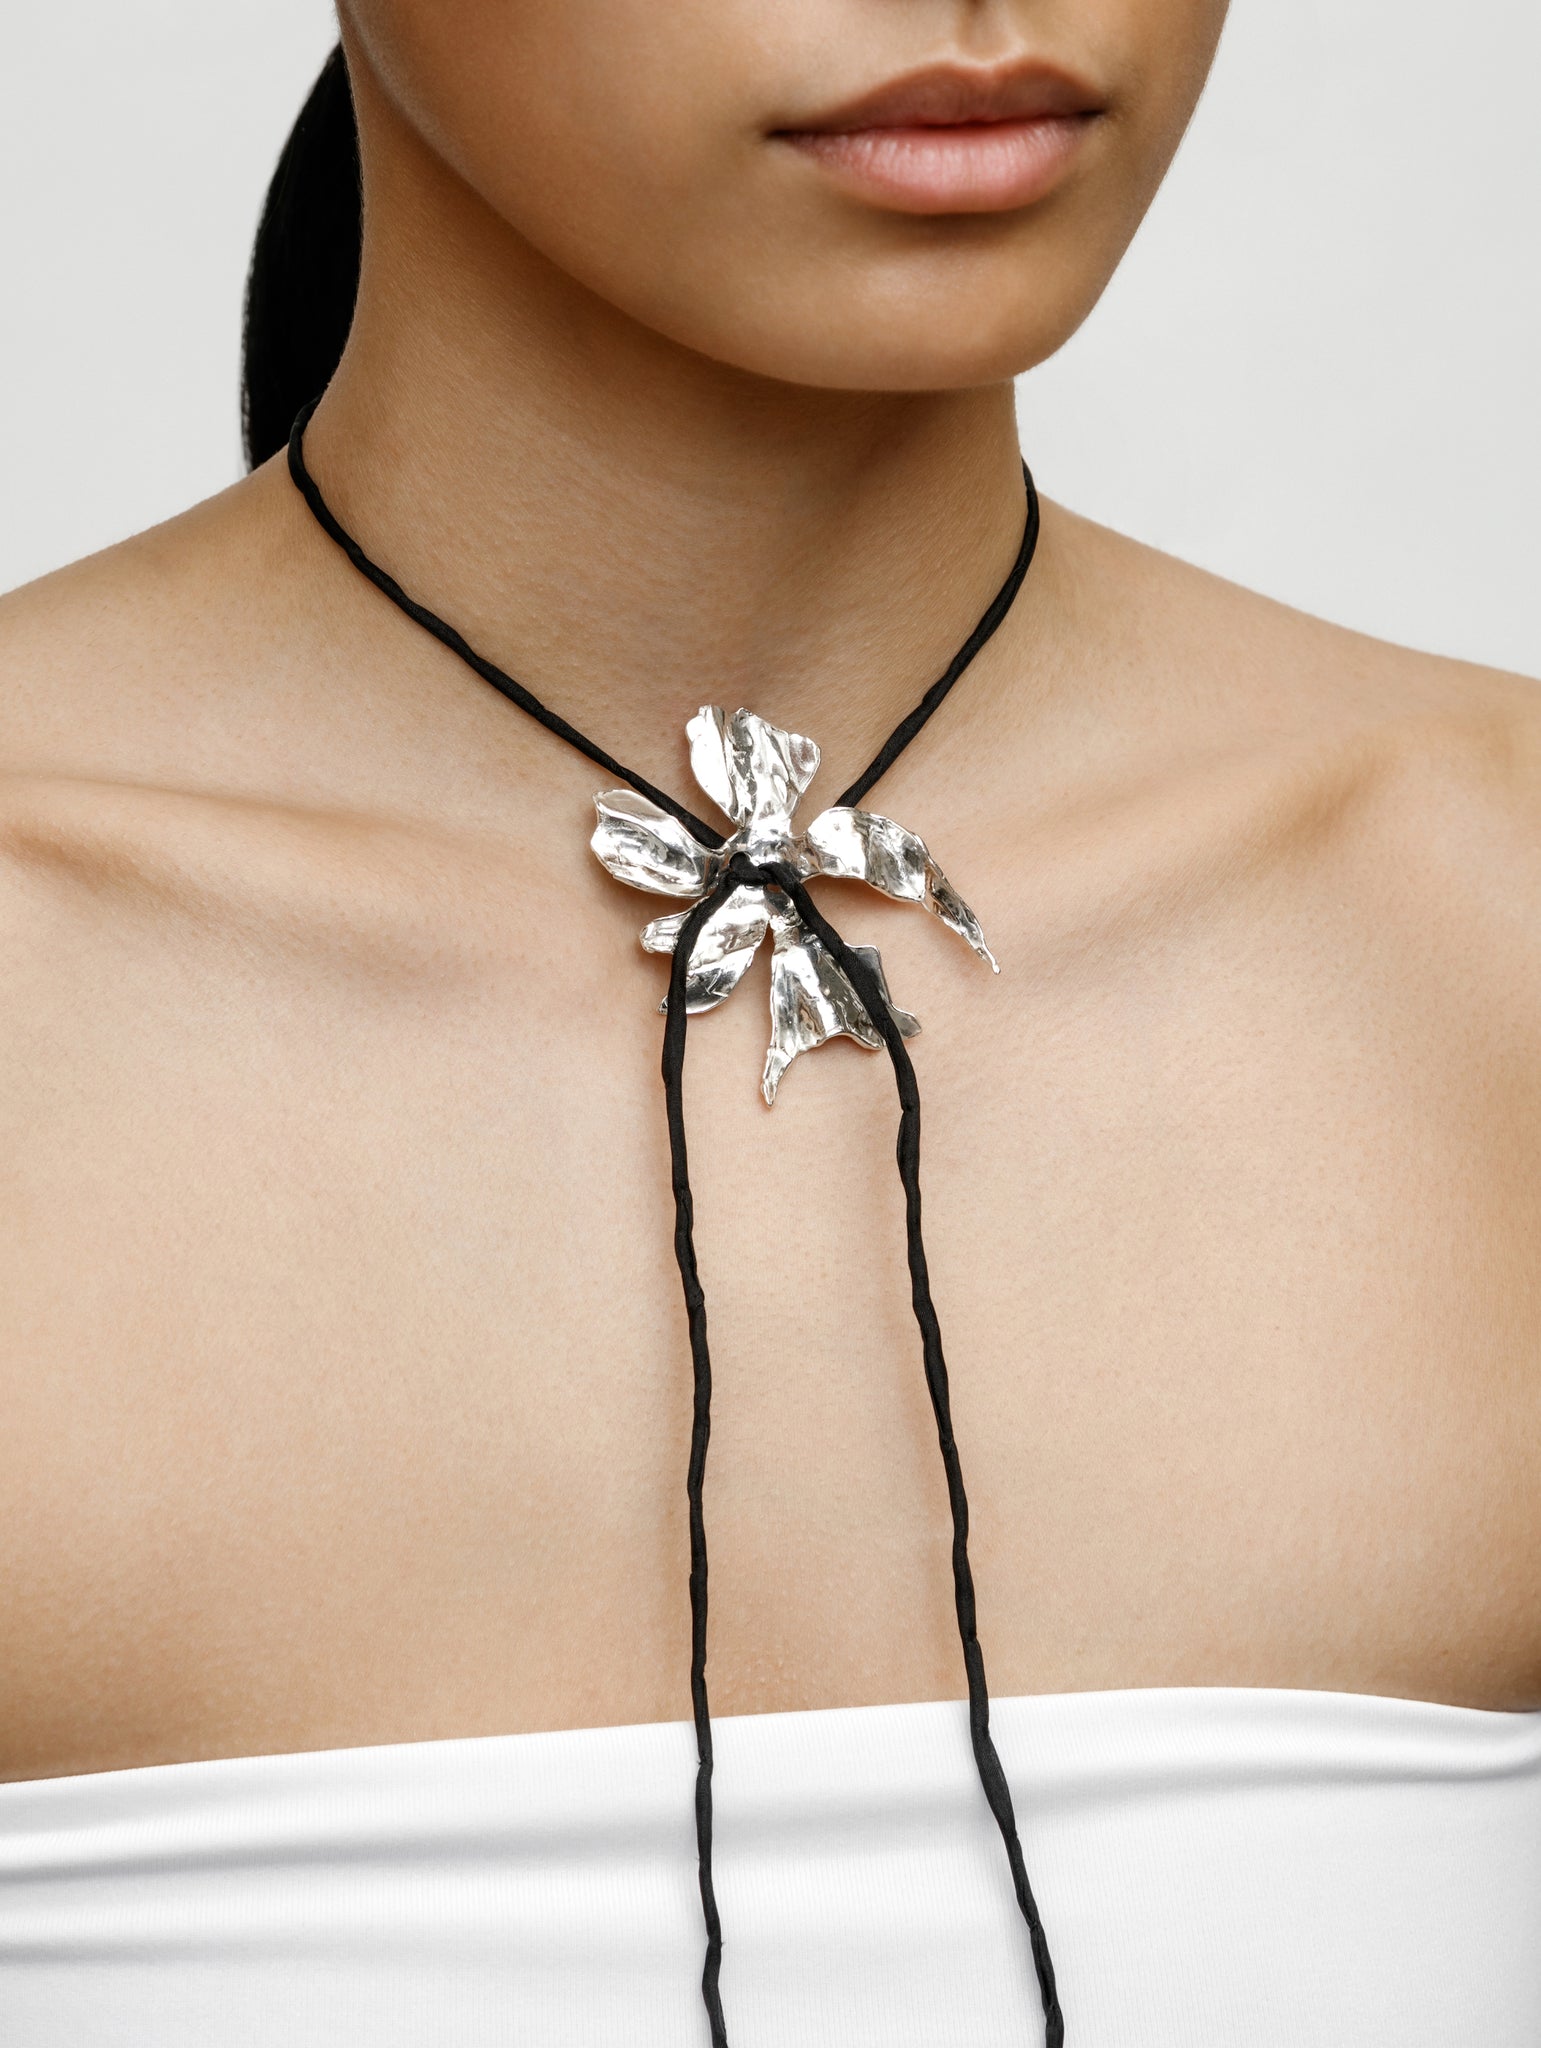 Wolf Circus Flower Silk Cord Necklace in Black | Silver Plated Flower Pendant Choker-Necklaces-wolfcircus.com